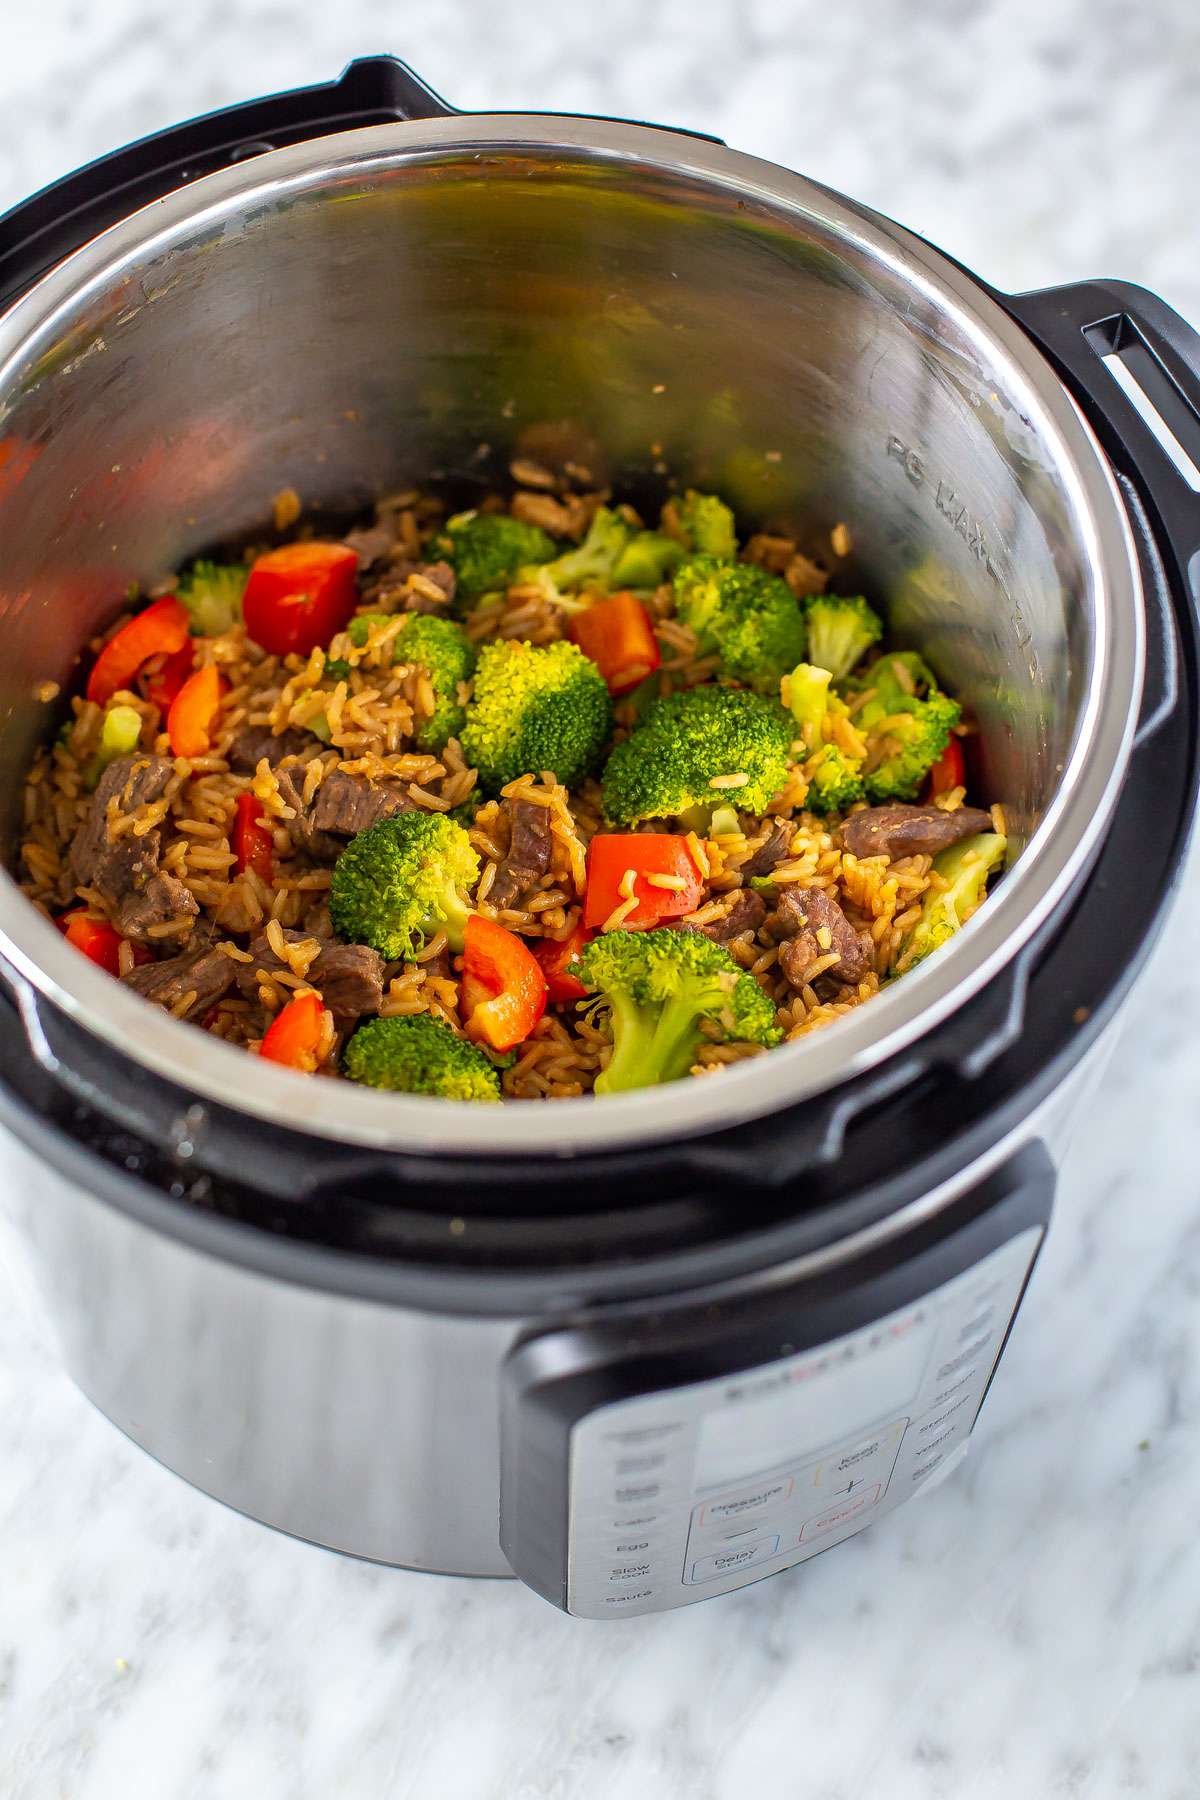 An overhead shot of an Instant Pot with beef and broccoli inside.